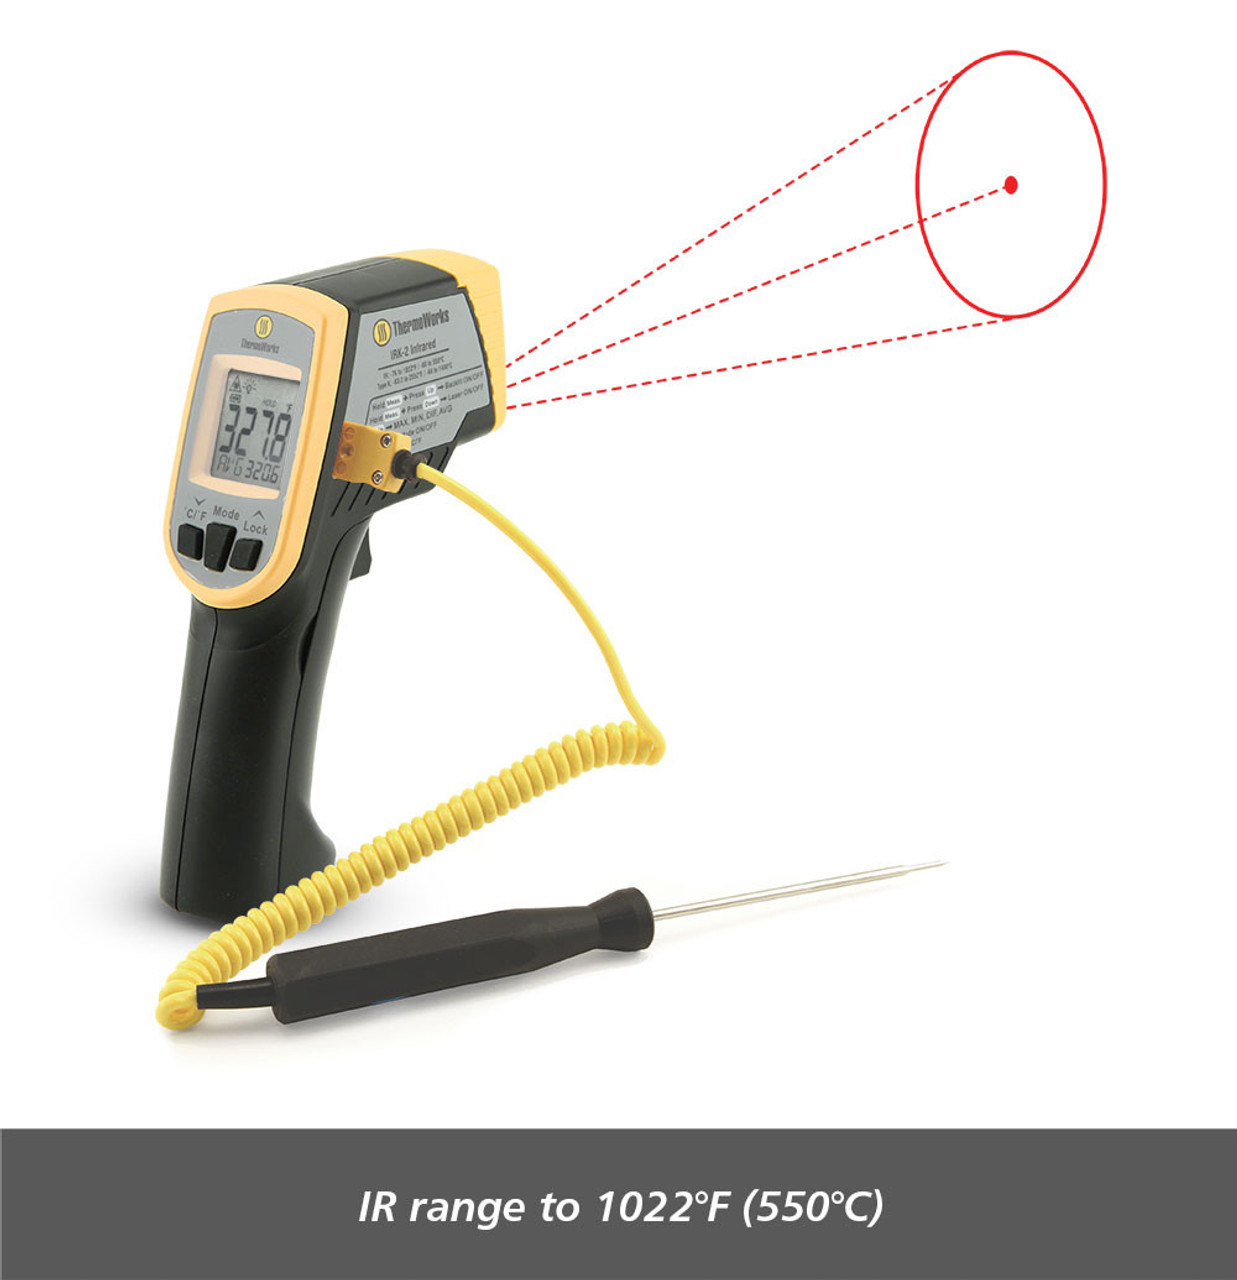 Industrial Infrared thermometer with star burst laser targeting